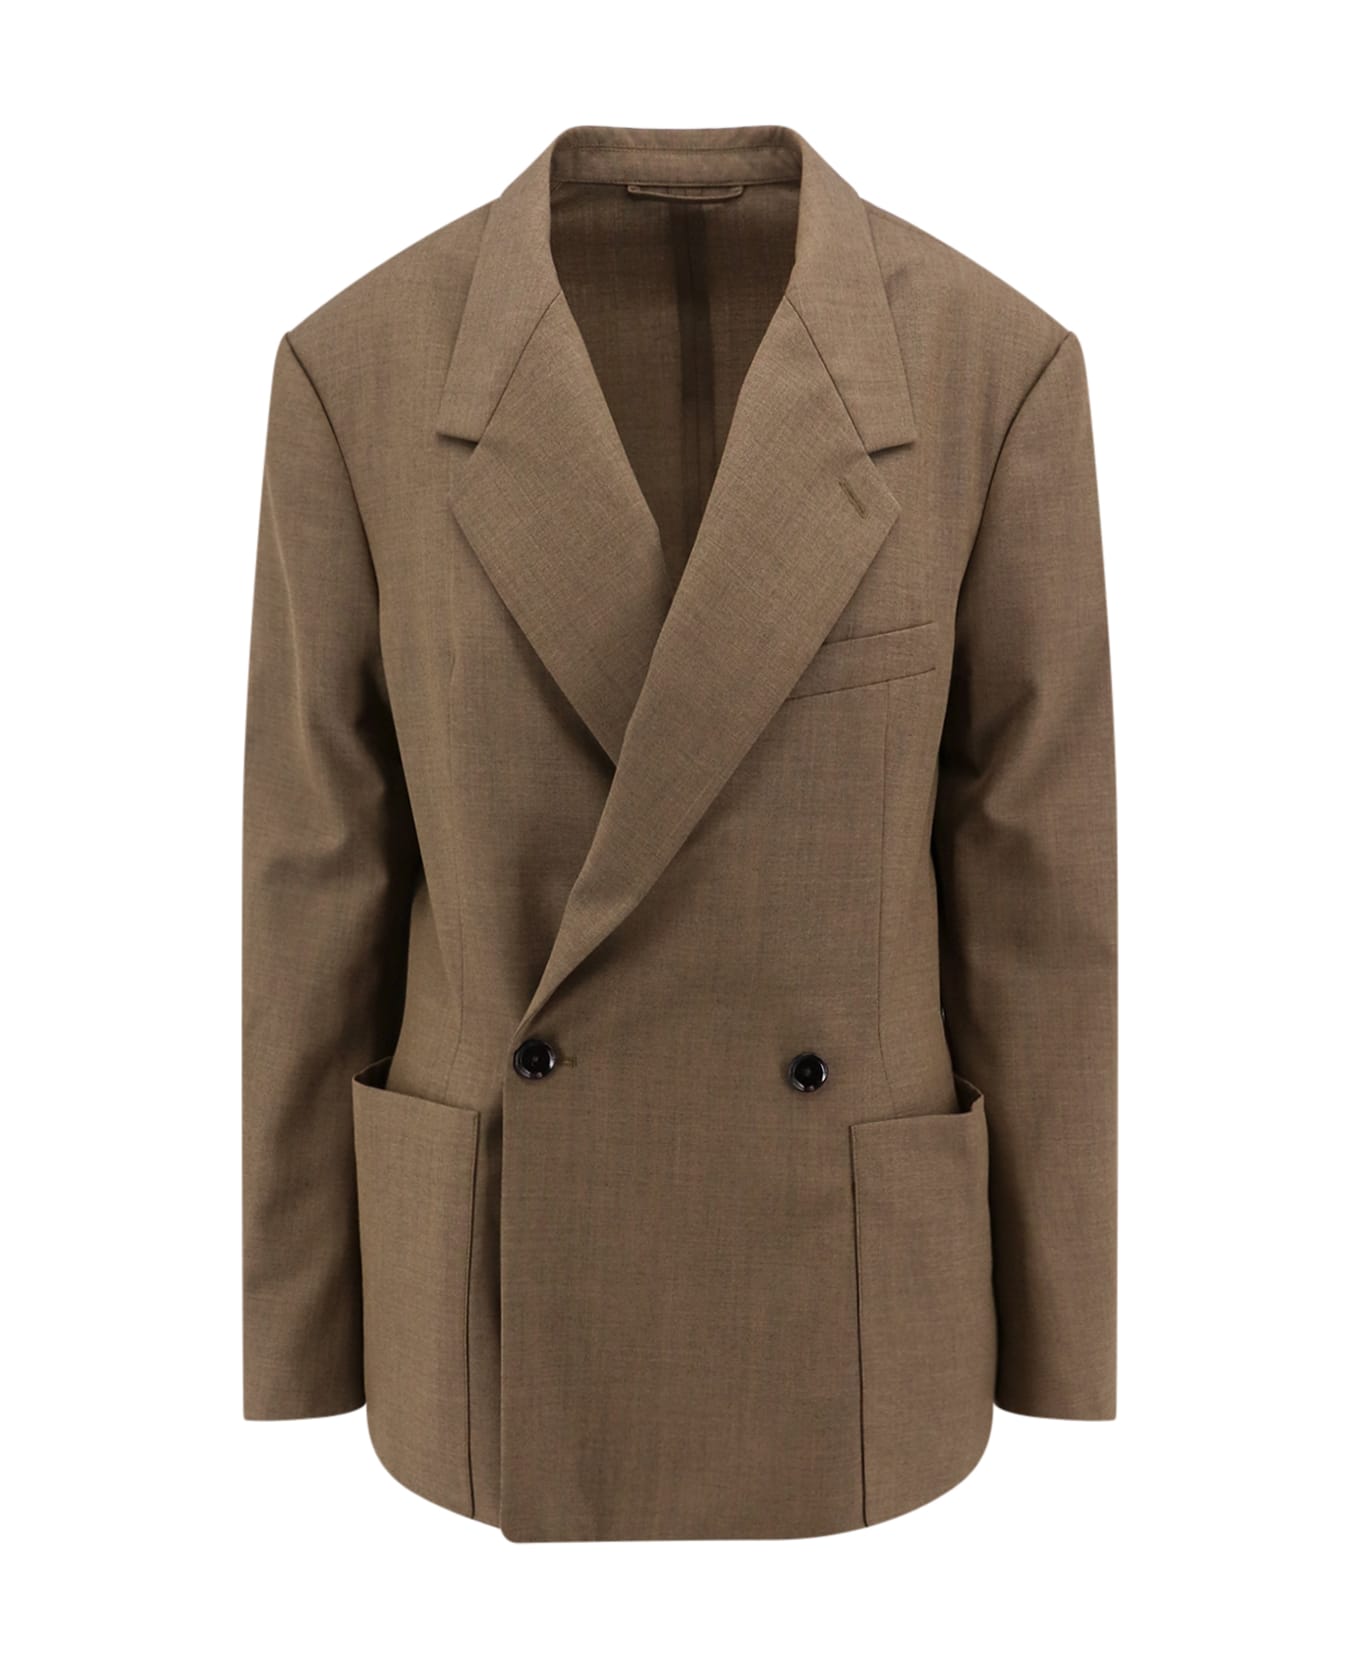 Lemaire Blazer - BROWN ブレザー